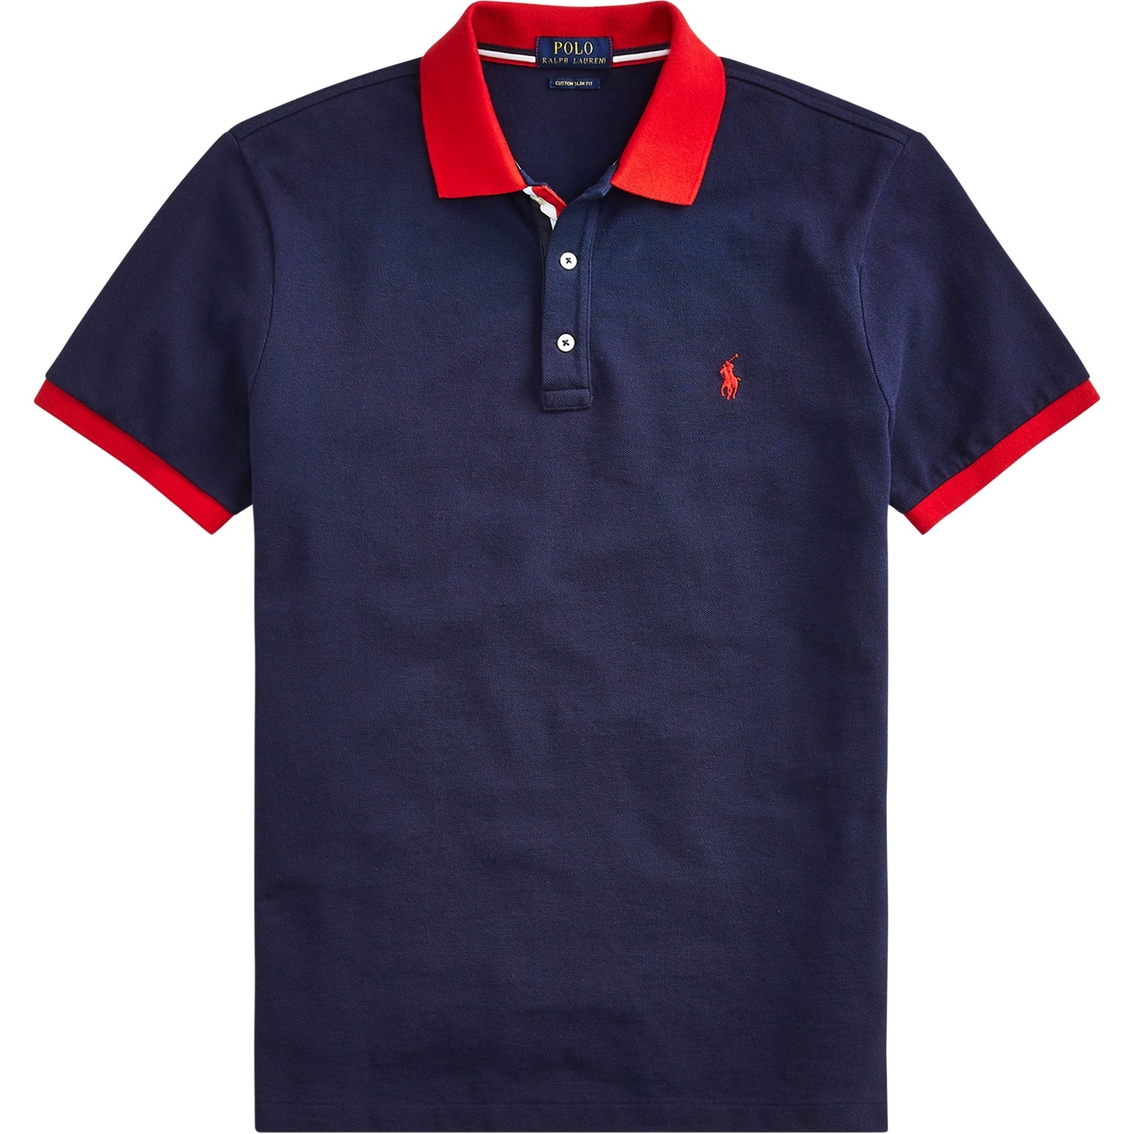 Polo Ralph Lauren Classic Fit Mesh Polo Shirt - Image 4 of 4